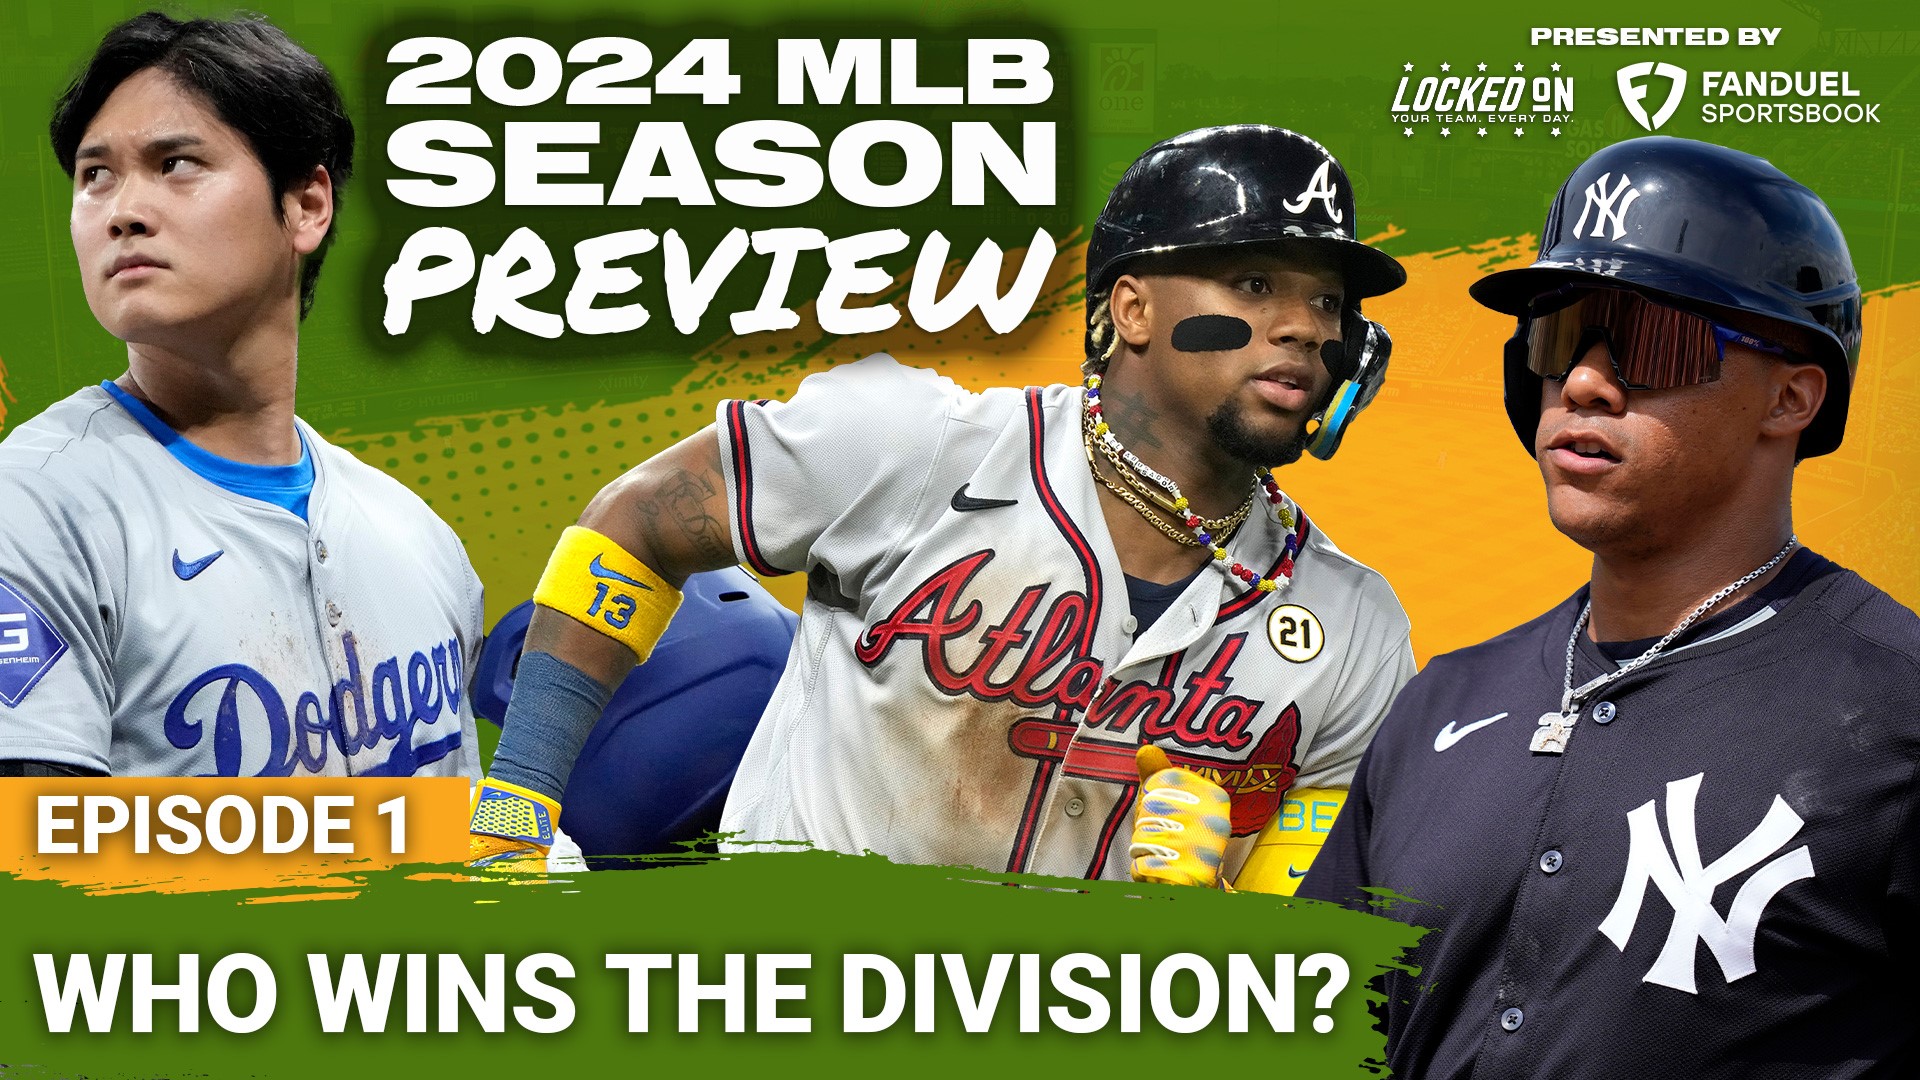 MLB SEASON PREVIEW: Dodgers, Braves, Astros, Orioles repeat as